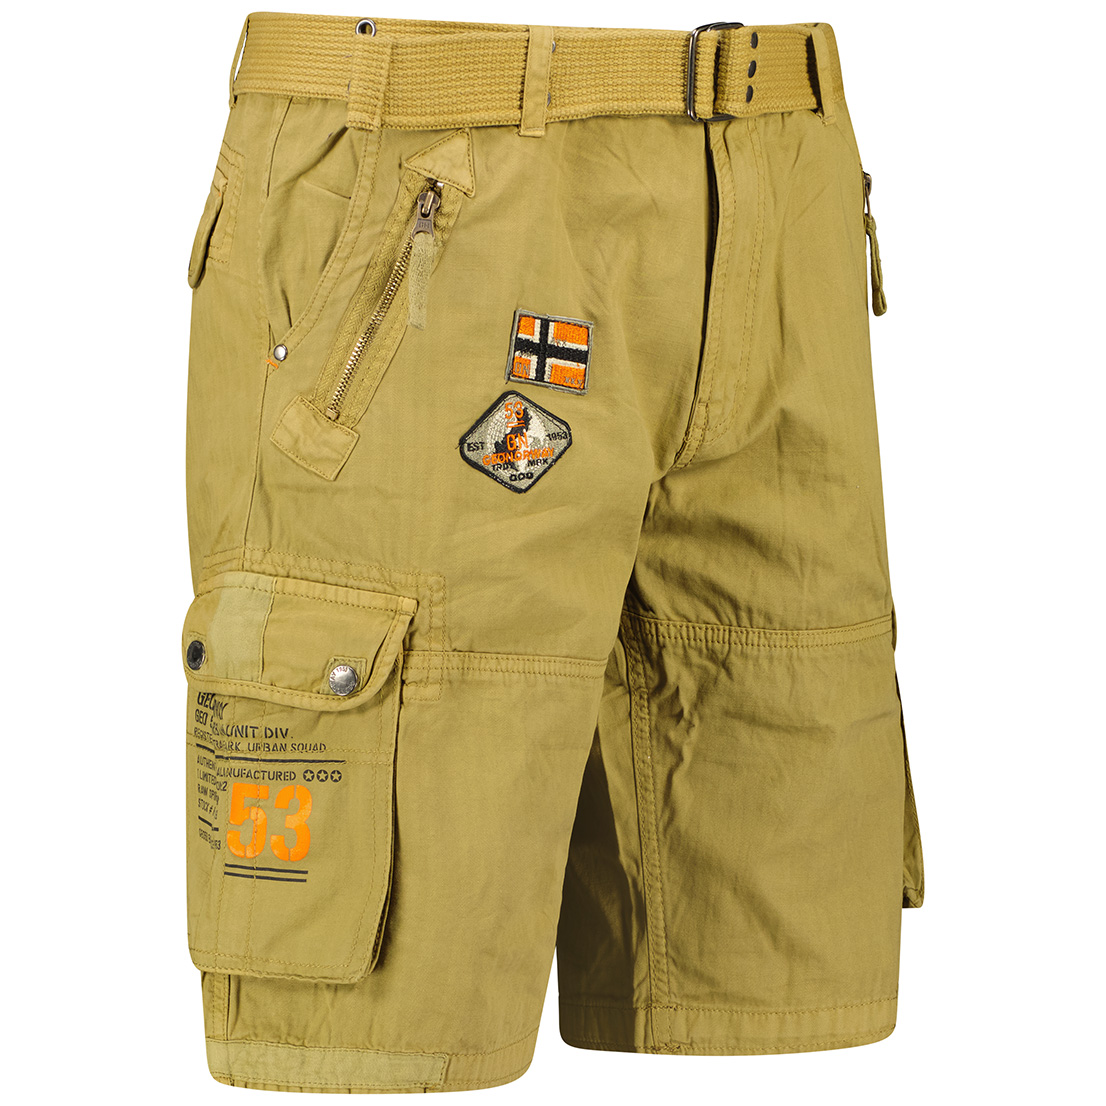 Cotton Shorts with Half Zip Fastening and 6 Pockets